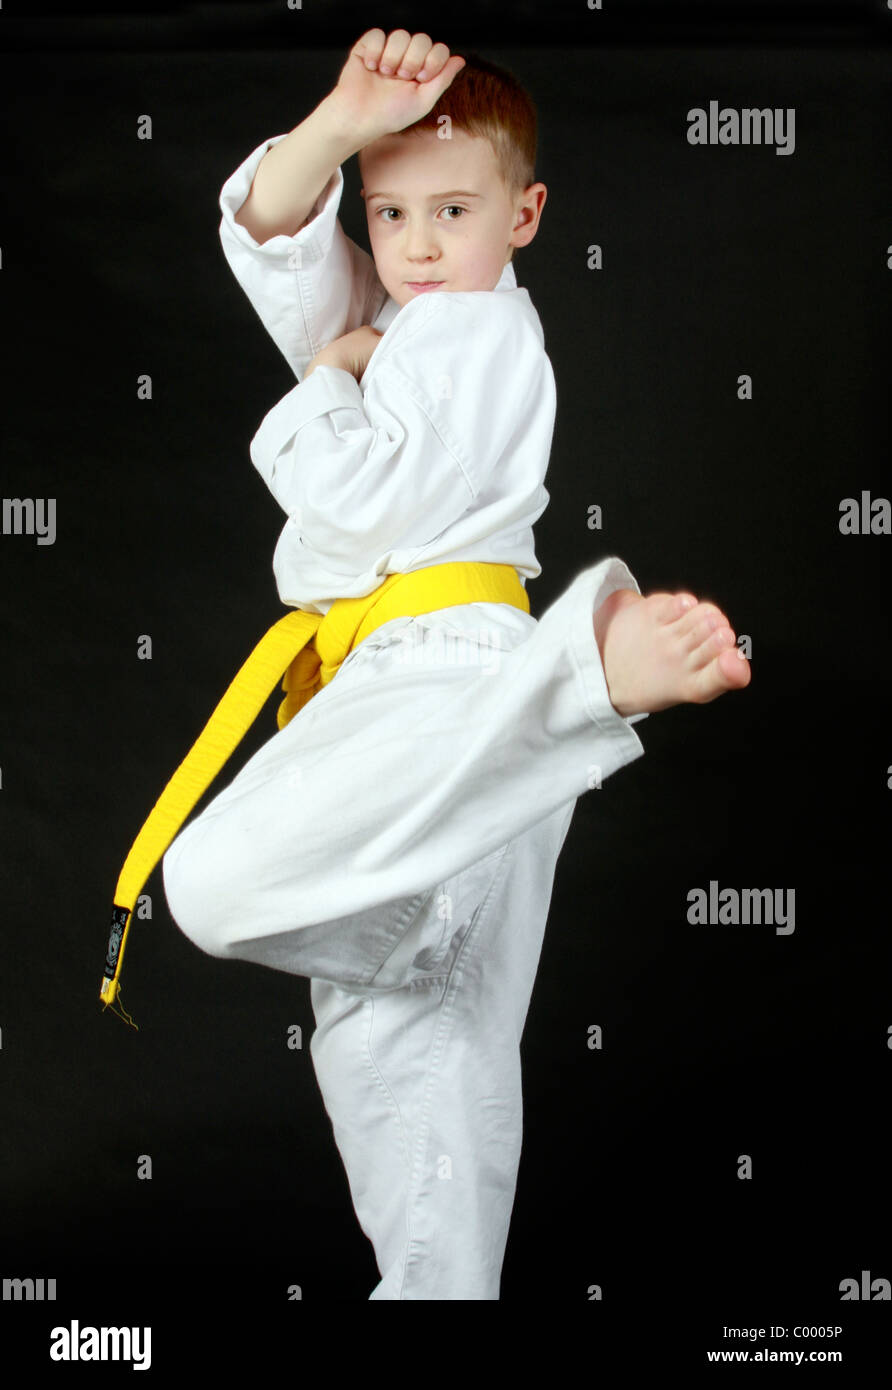 Young boy practicing Karate moves Stock Photo